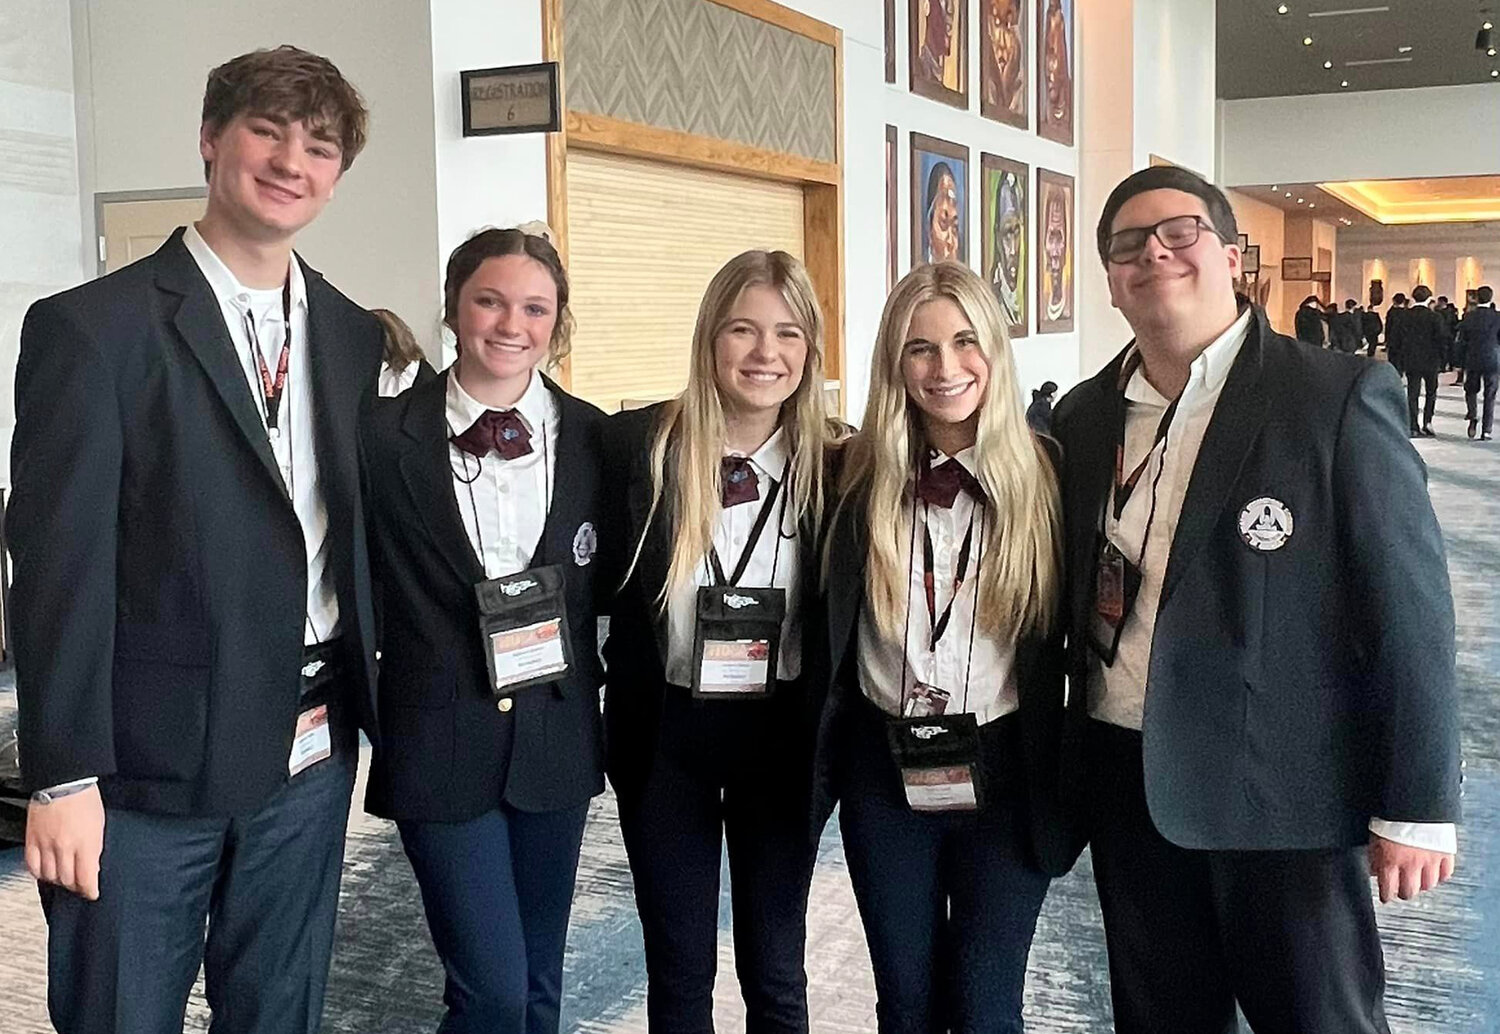 Aledo High School’s HOSA state qualifiers included (from left) Lanham Watts, Addison Redifer, Audrey Hood, Taylor Smith, and Petey Montoya.